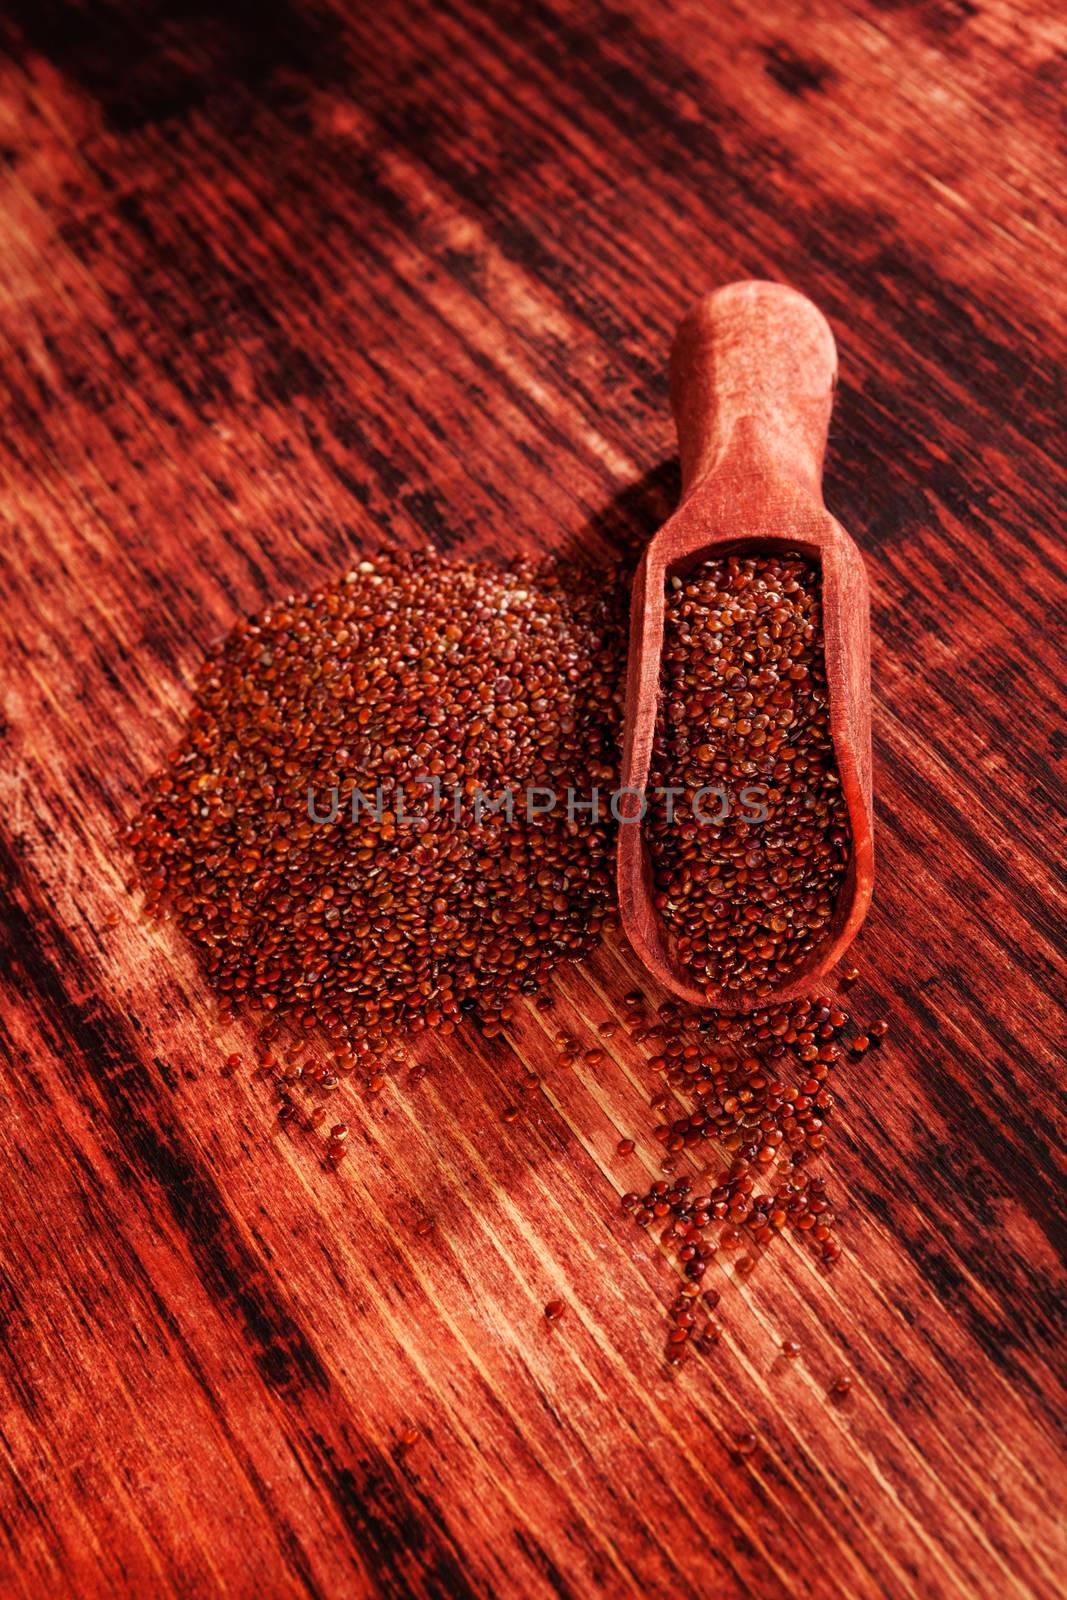 Red quinoa seeds on wooden table. by eskymaks